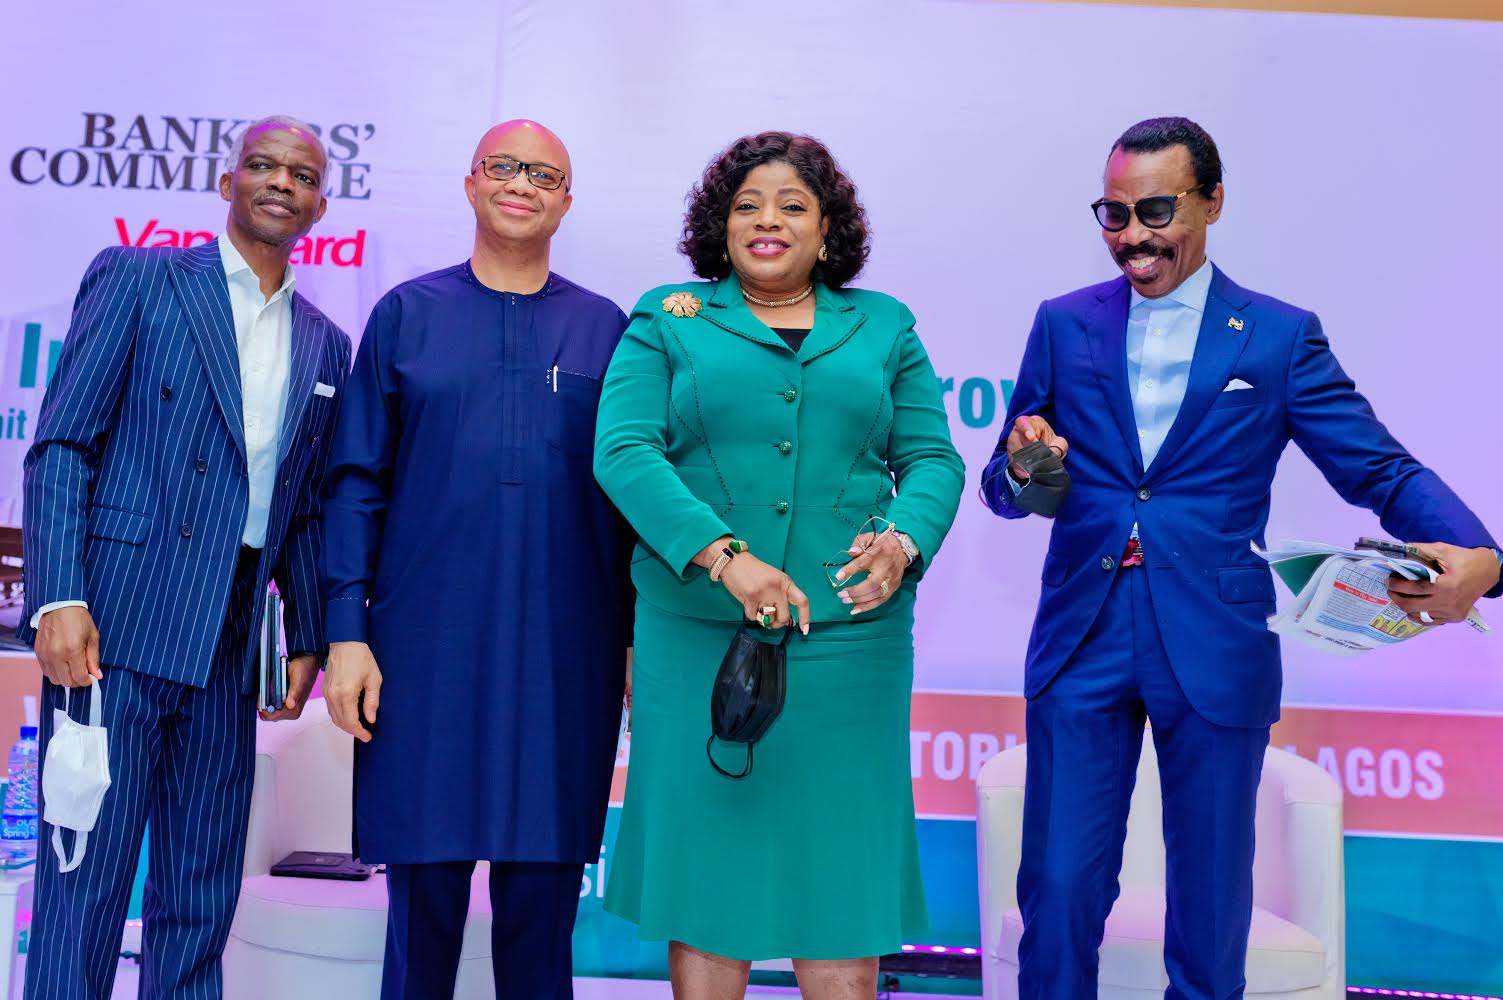 Caption: (left to right) Dr. Doyin Salami, Chairman Nigeria’s Economic Advisory Council, Mr. Ben Akabueze, Director General, Budget Office, Mrs. Nneka Onyeali-Ikpe, Managing Director/CEO Fidelity Bank and Mr. Bismarck Rewane, CEO, Financial Derivatives at the One-Day Summit on the Economy by bank CEOs, organized by the CBN/Bankers Committee and Vanguard Newspapers in Lagos Friday.